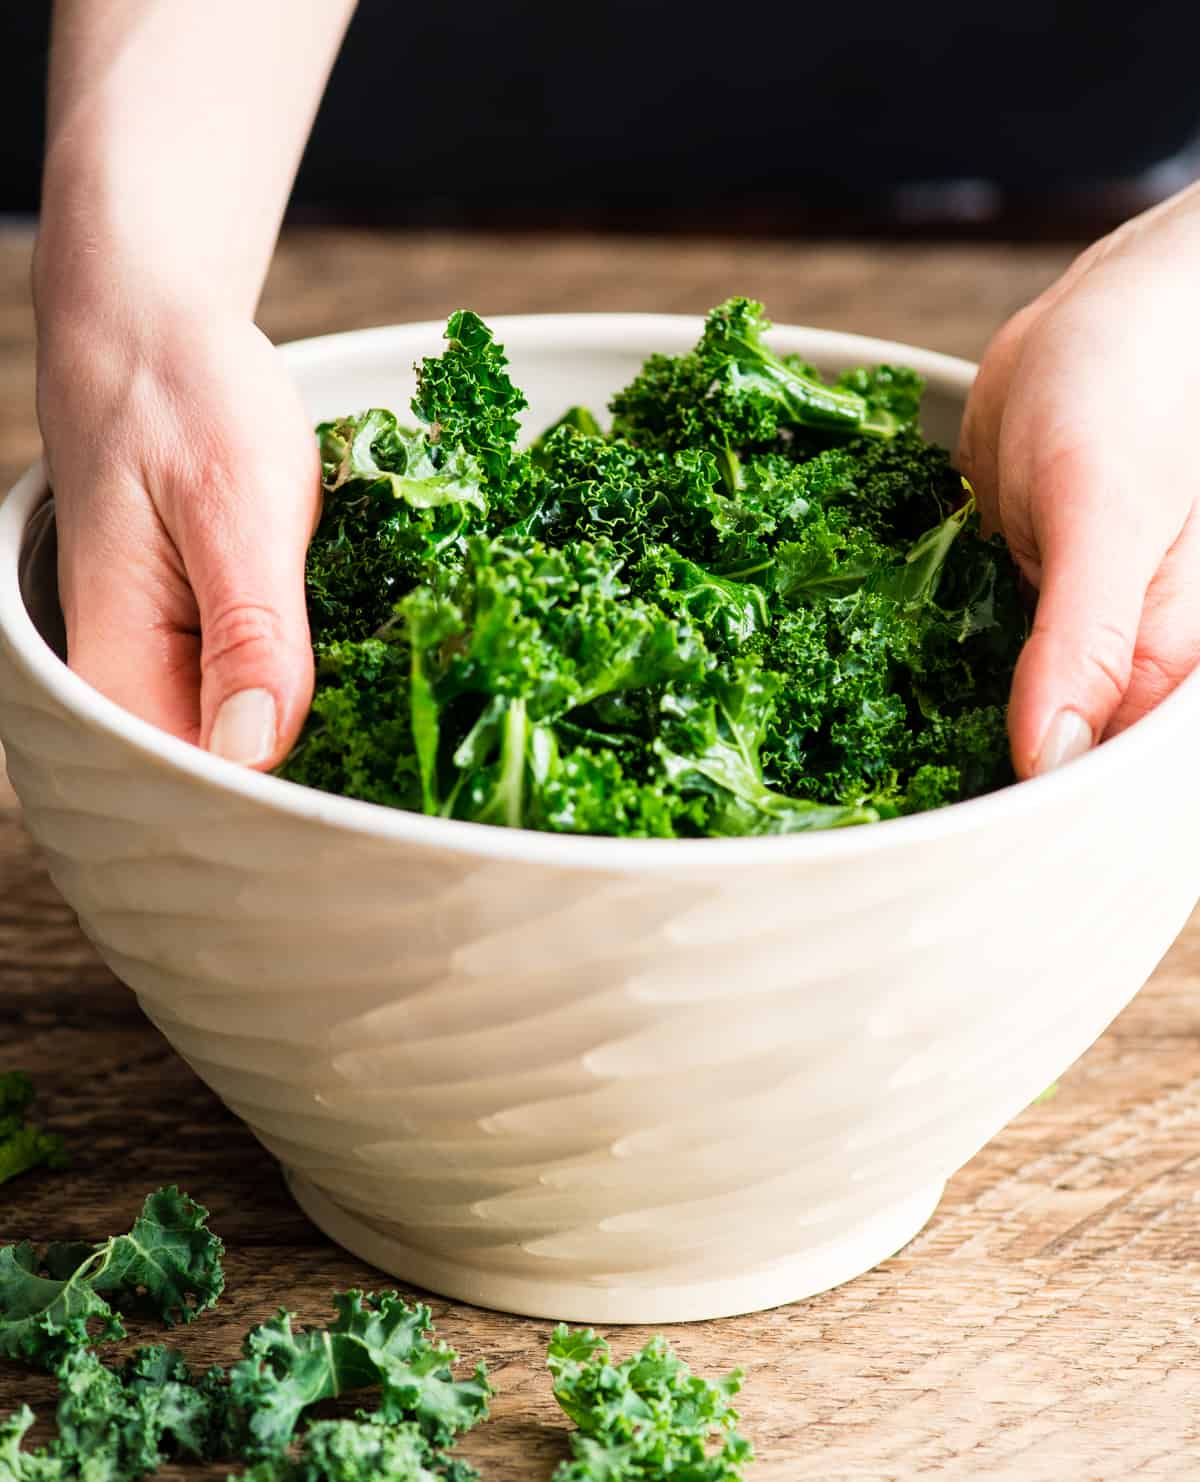 Hands in a bowl massaging olive oil into kale leaves showing how to make kale chips